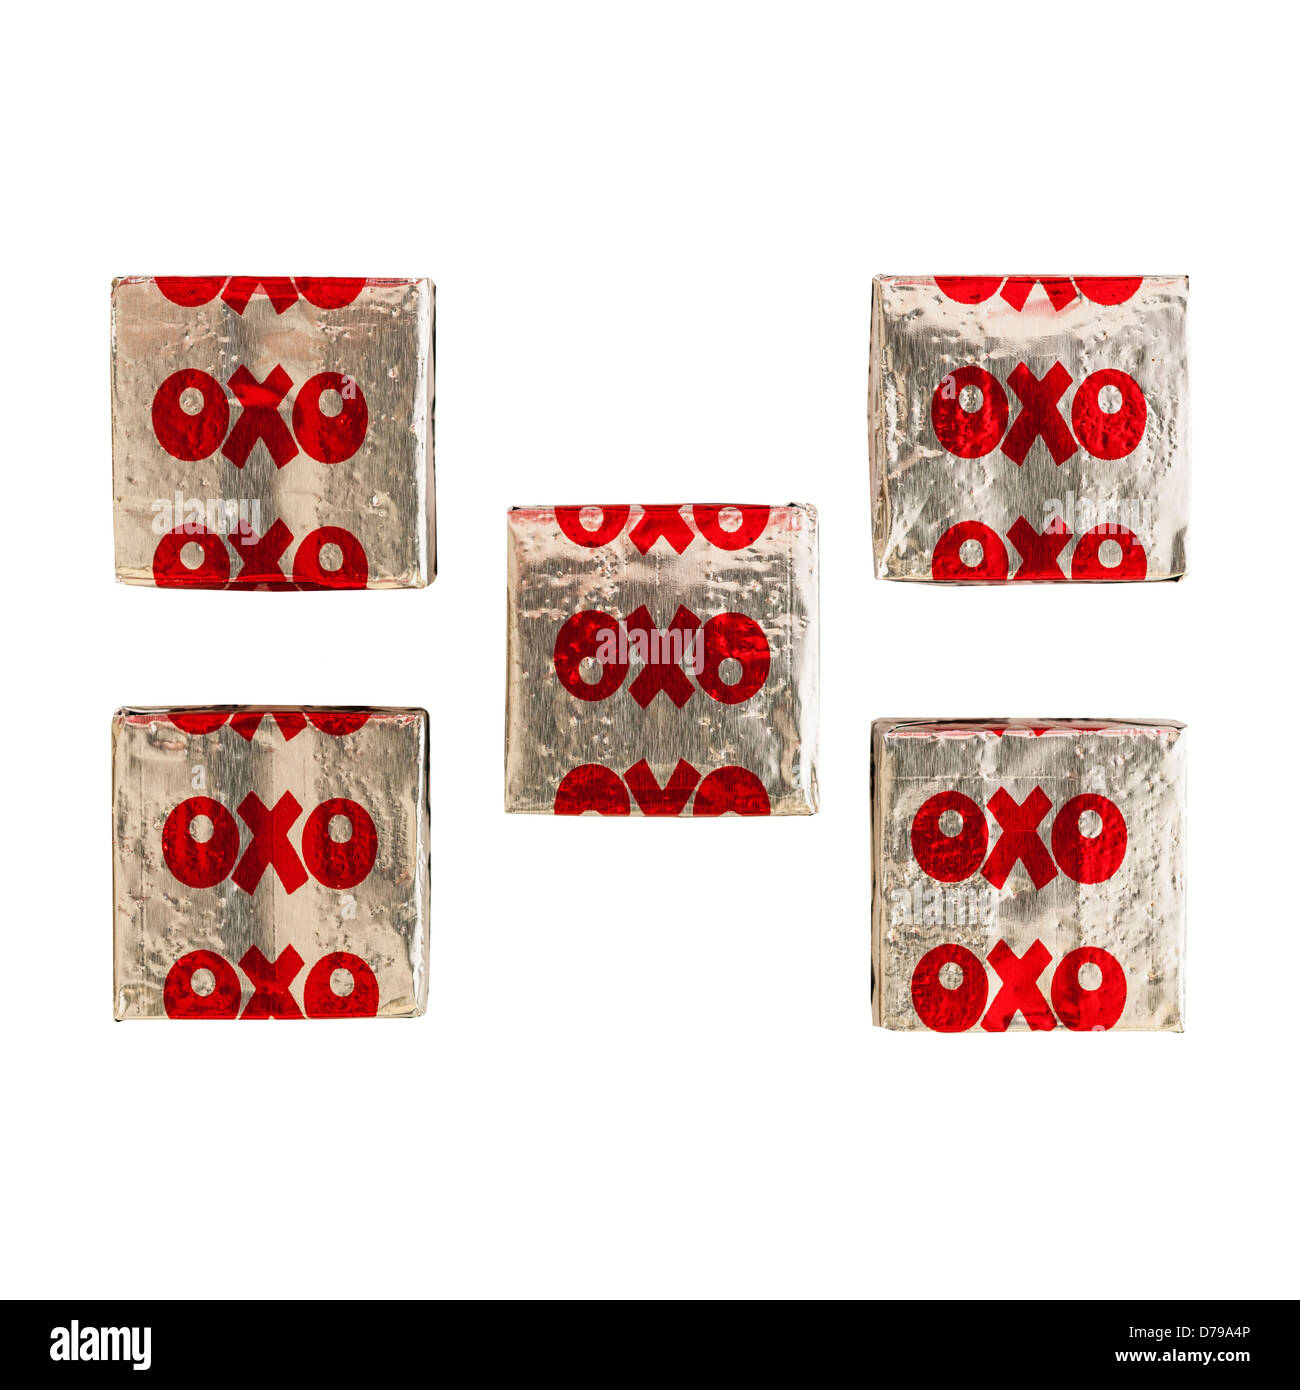 Beef Oxo cubes on a white background Stock Photo